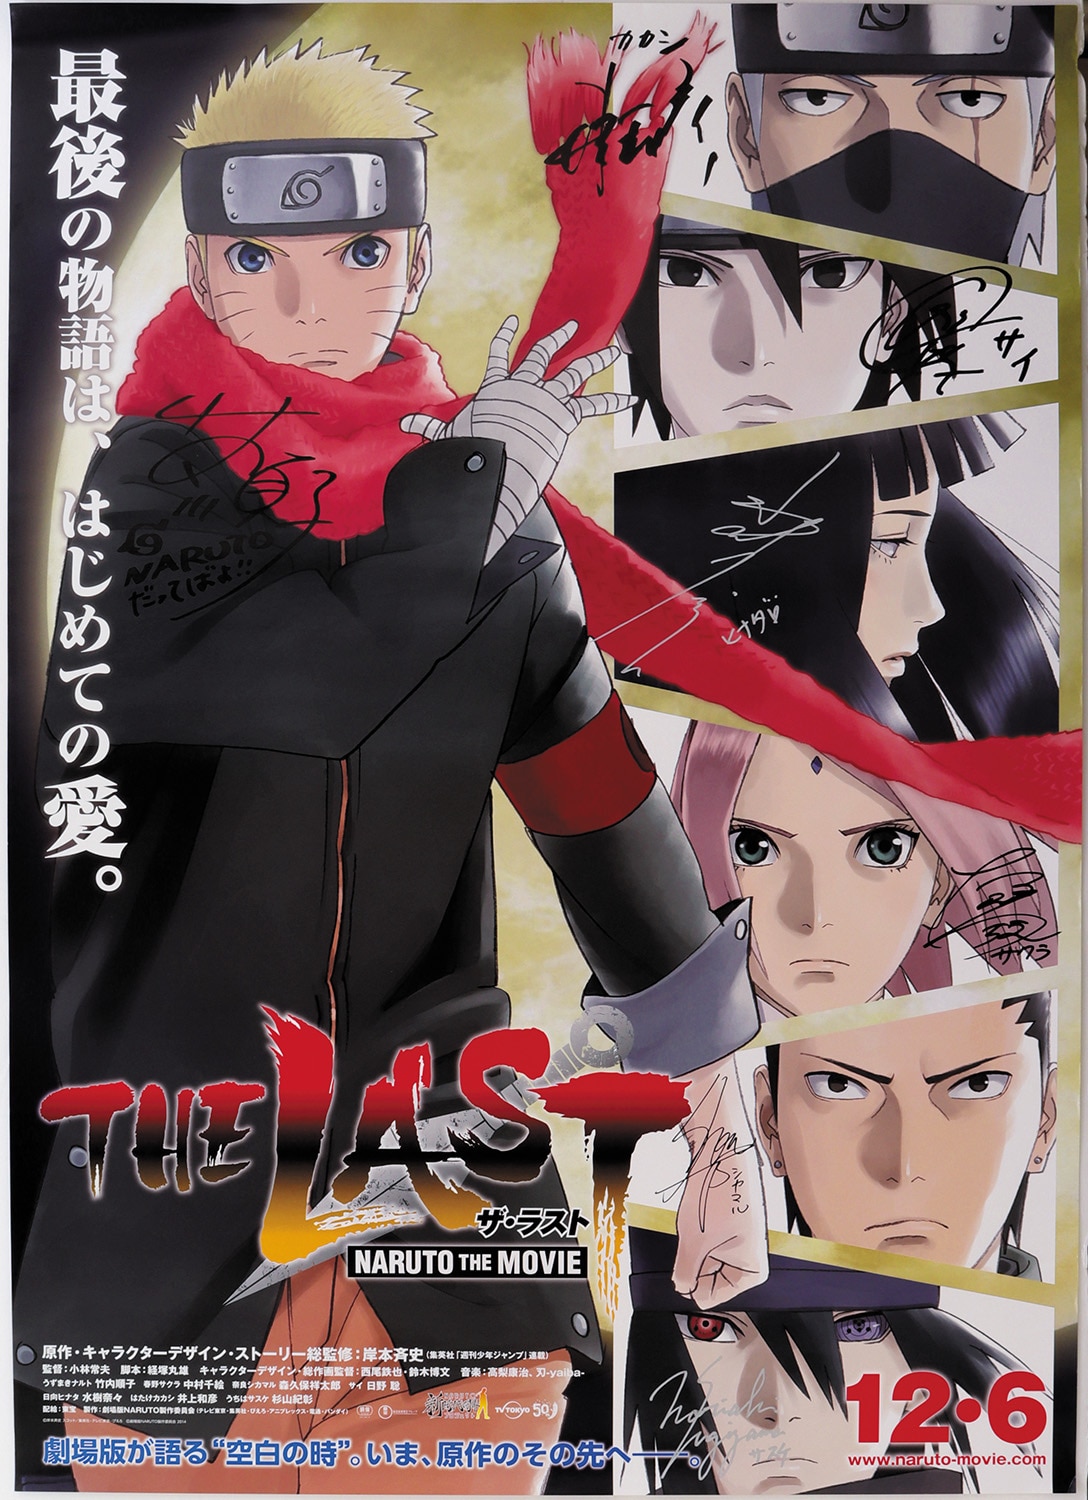 Naruto Appearance Voice Actor Posted Autograph